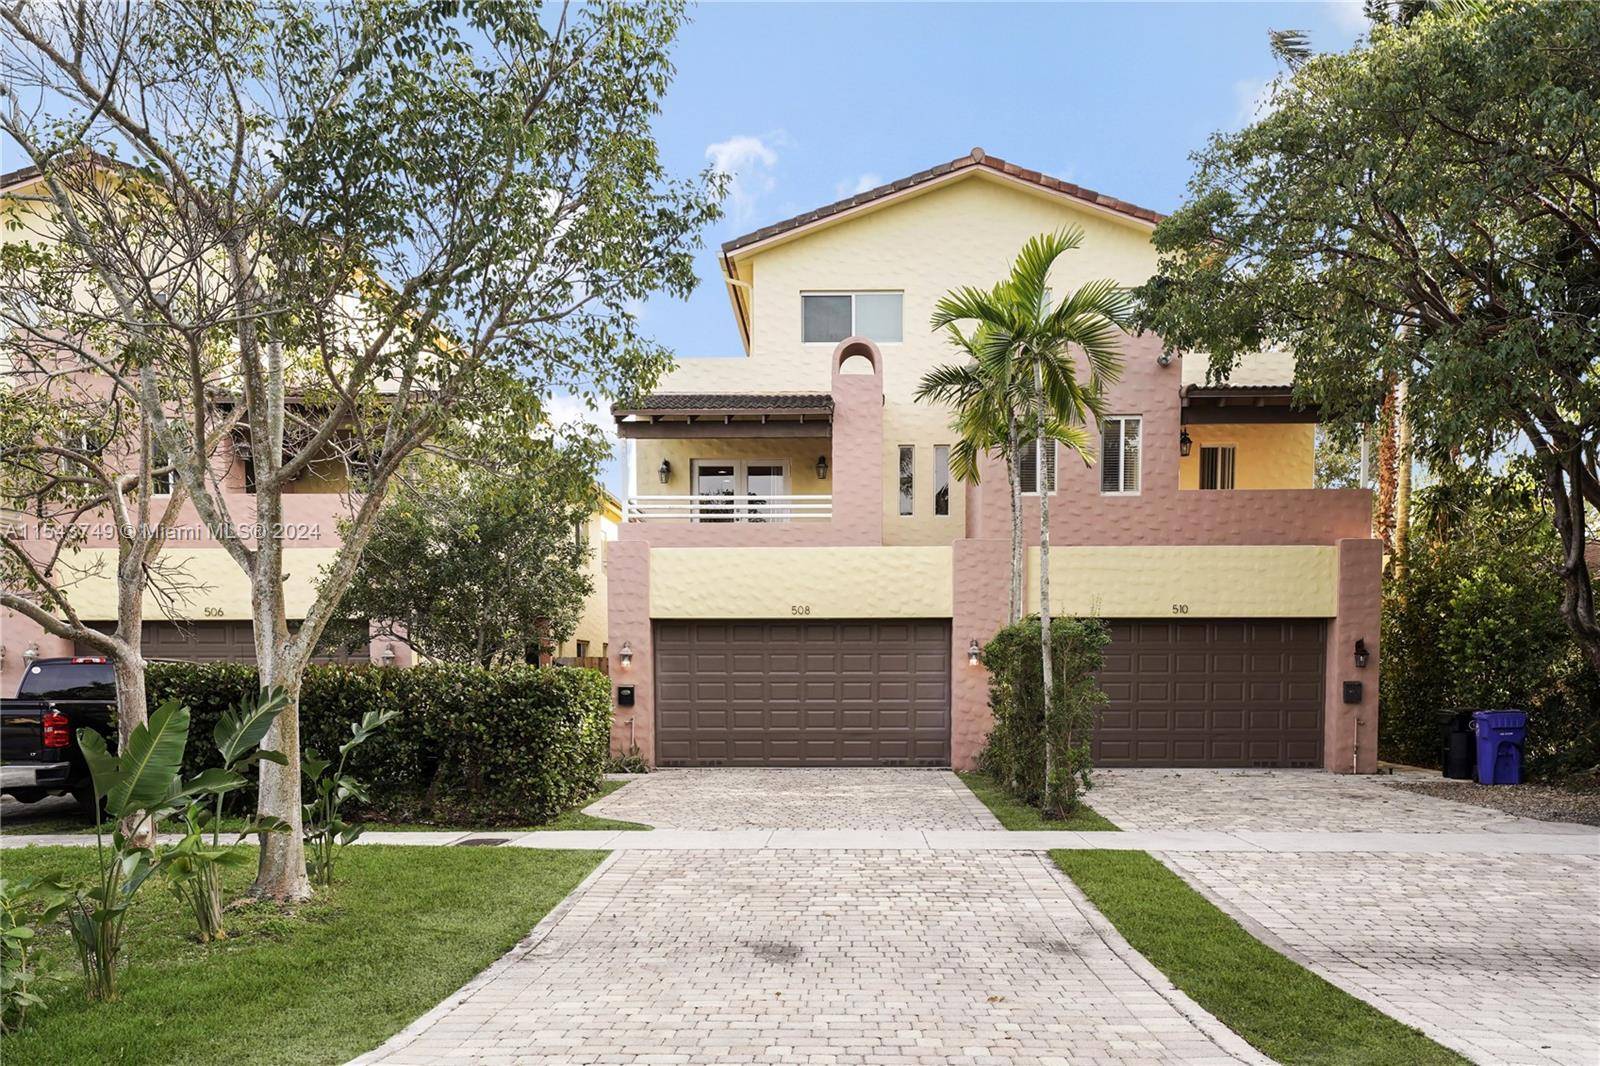 3 story townhome nestled in the heart of Fort Lauderdale with 4 bedrooms, 4 bathrooms, and a 2 car garage.